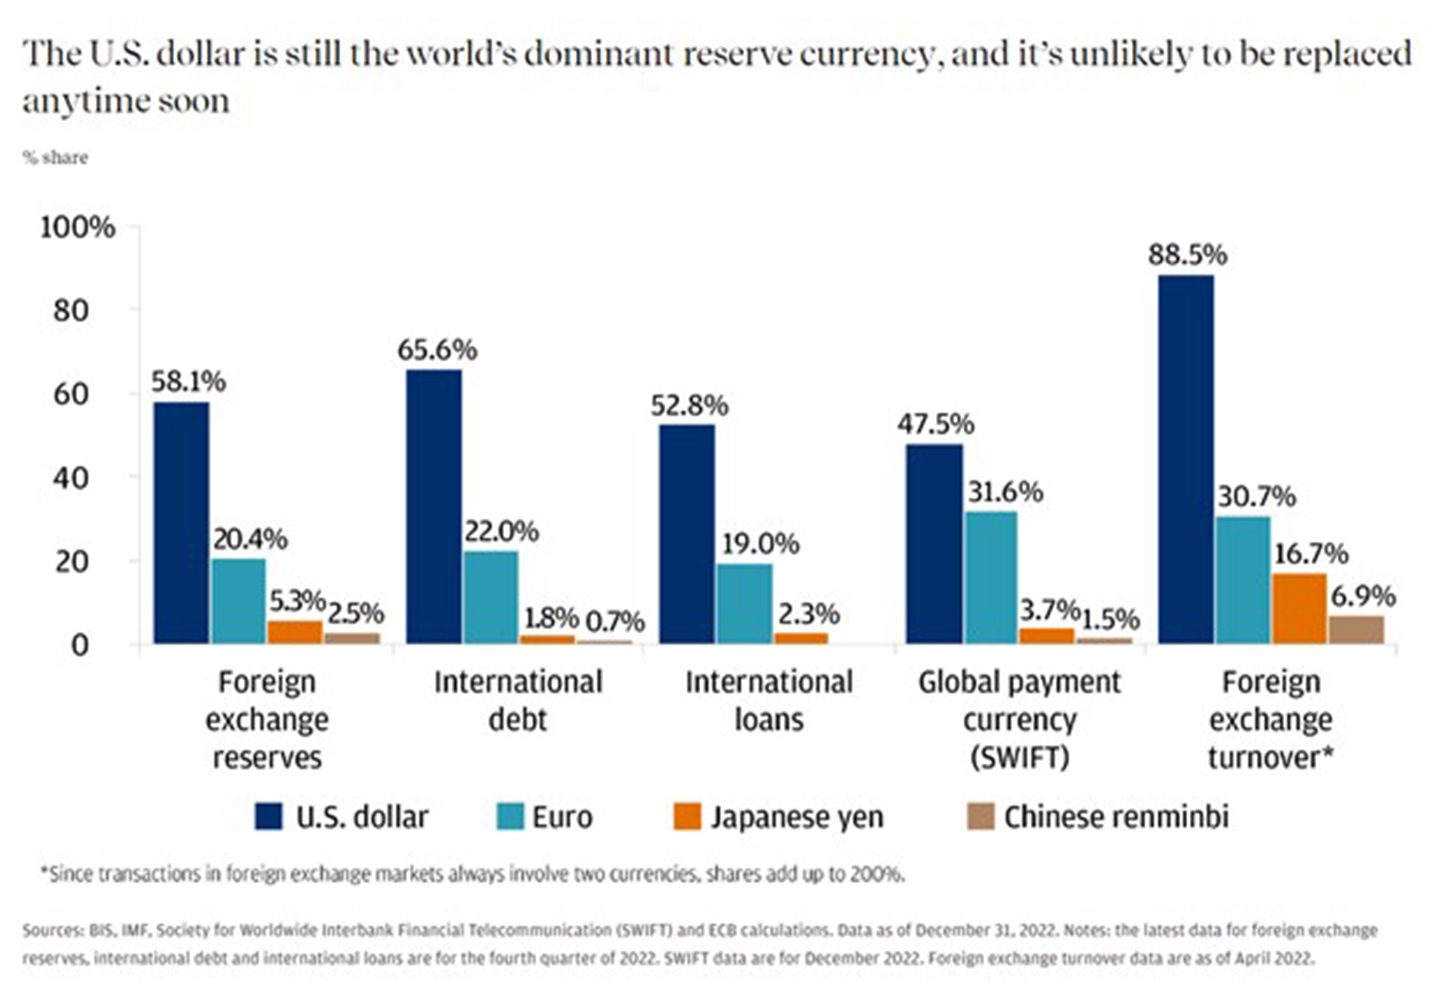 This bar graph describes each currency's % share of total when it comes to foreign exchange reserves, international debt, international loans, global payment currency (SWIFT), and foreign exchange turnover. 